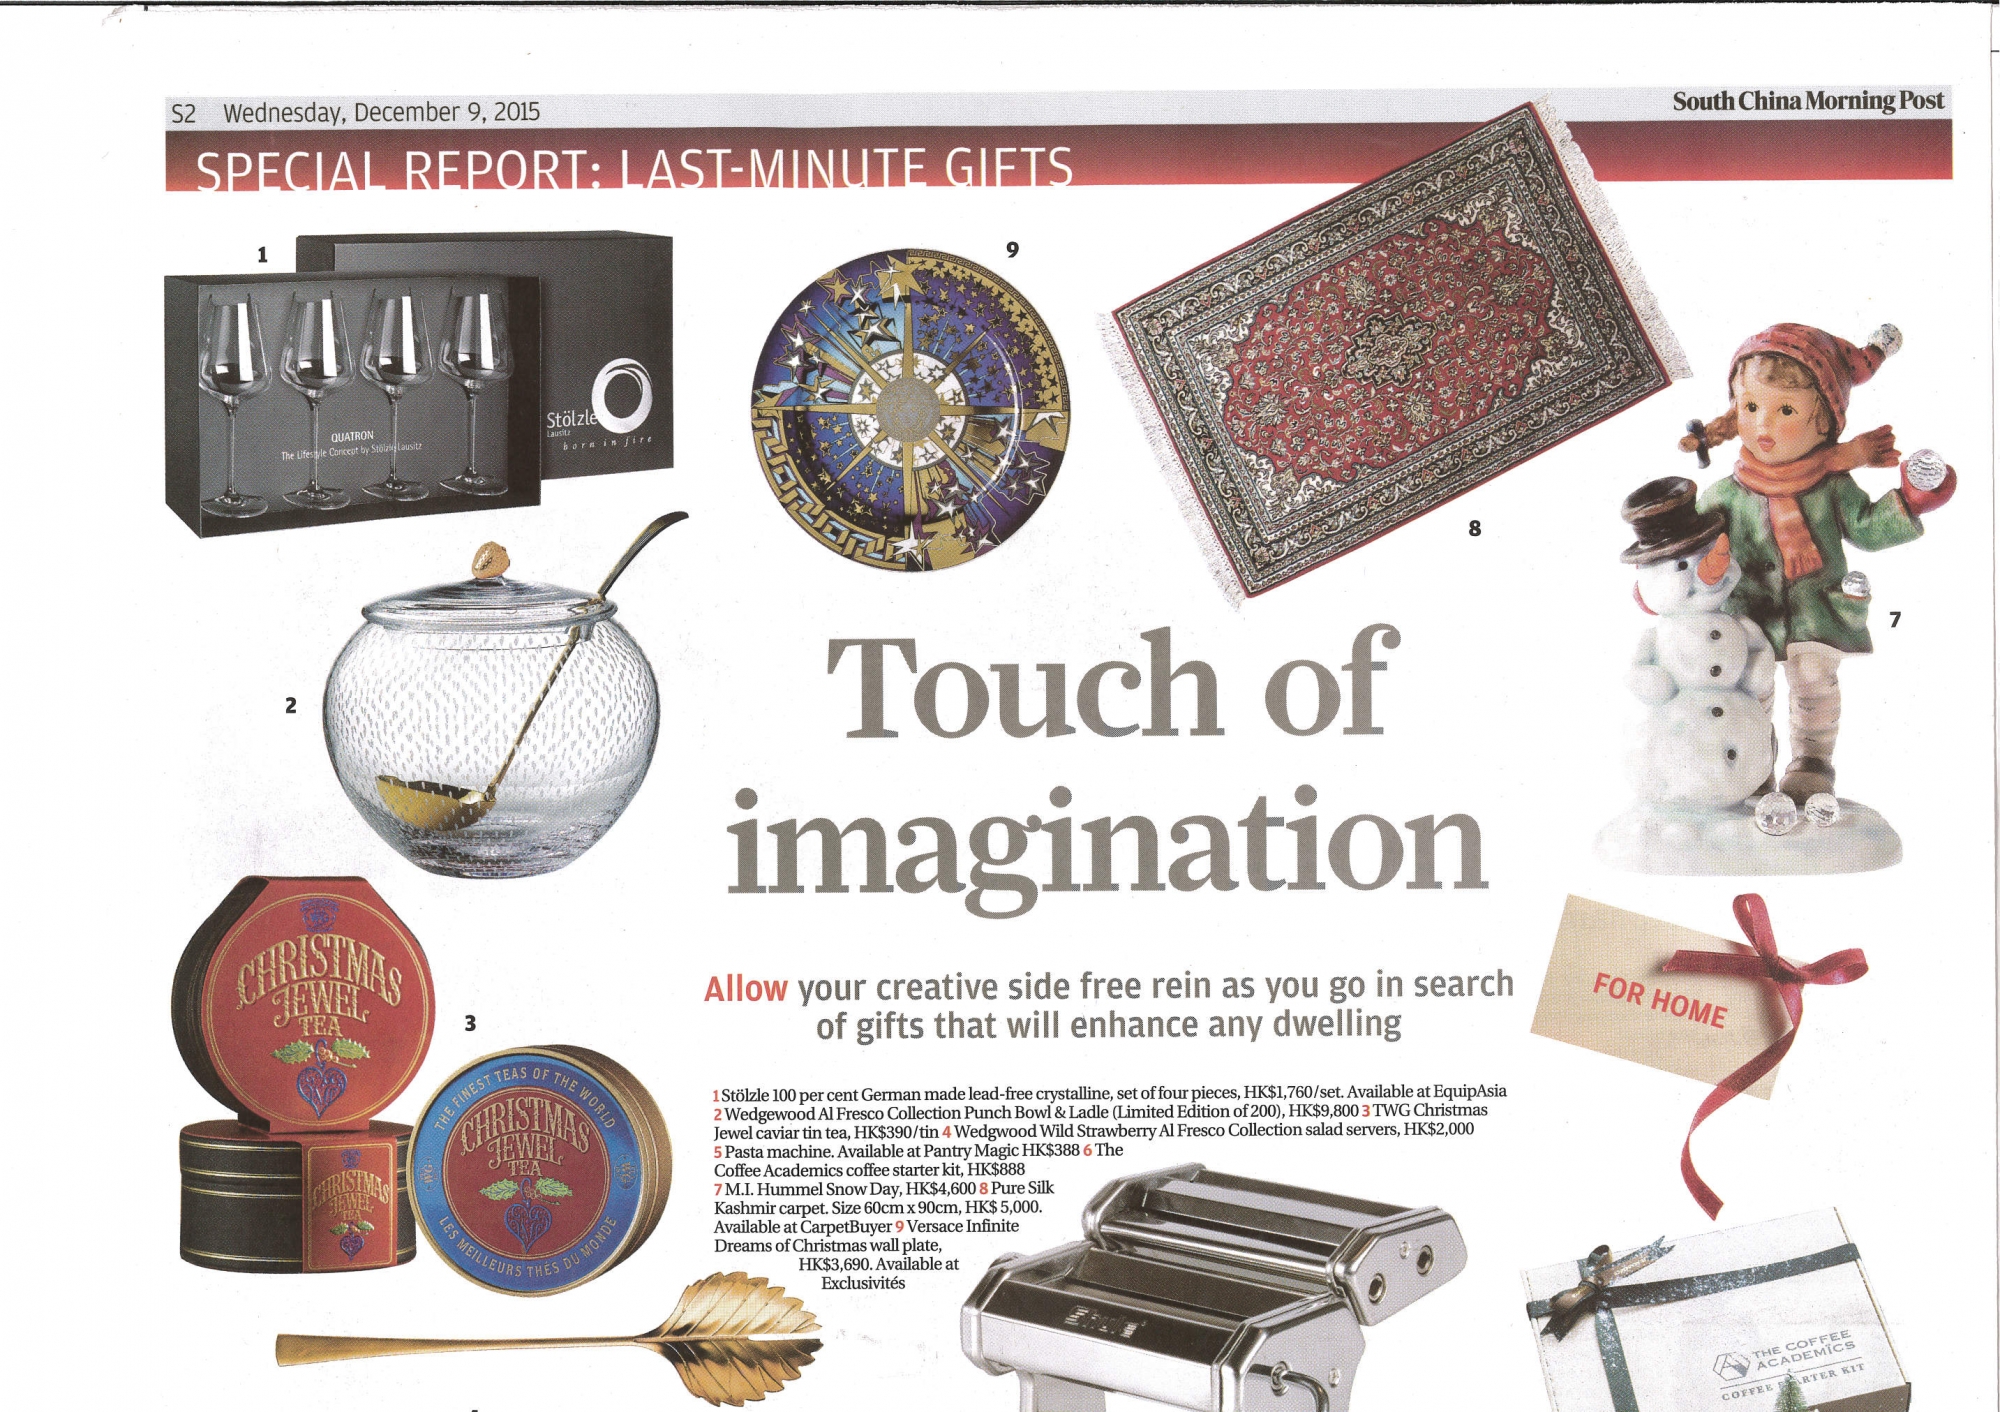 Self Photos / Files - 20151209 SCMP special report - last minute gift